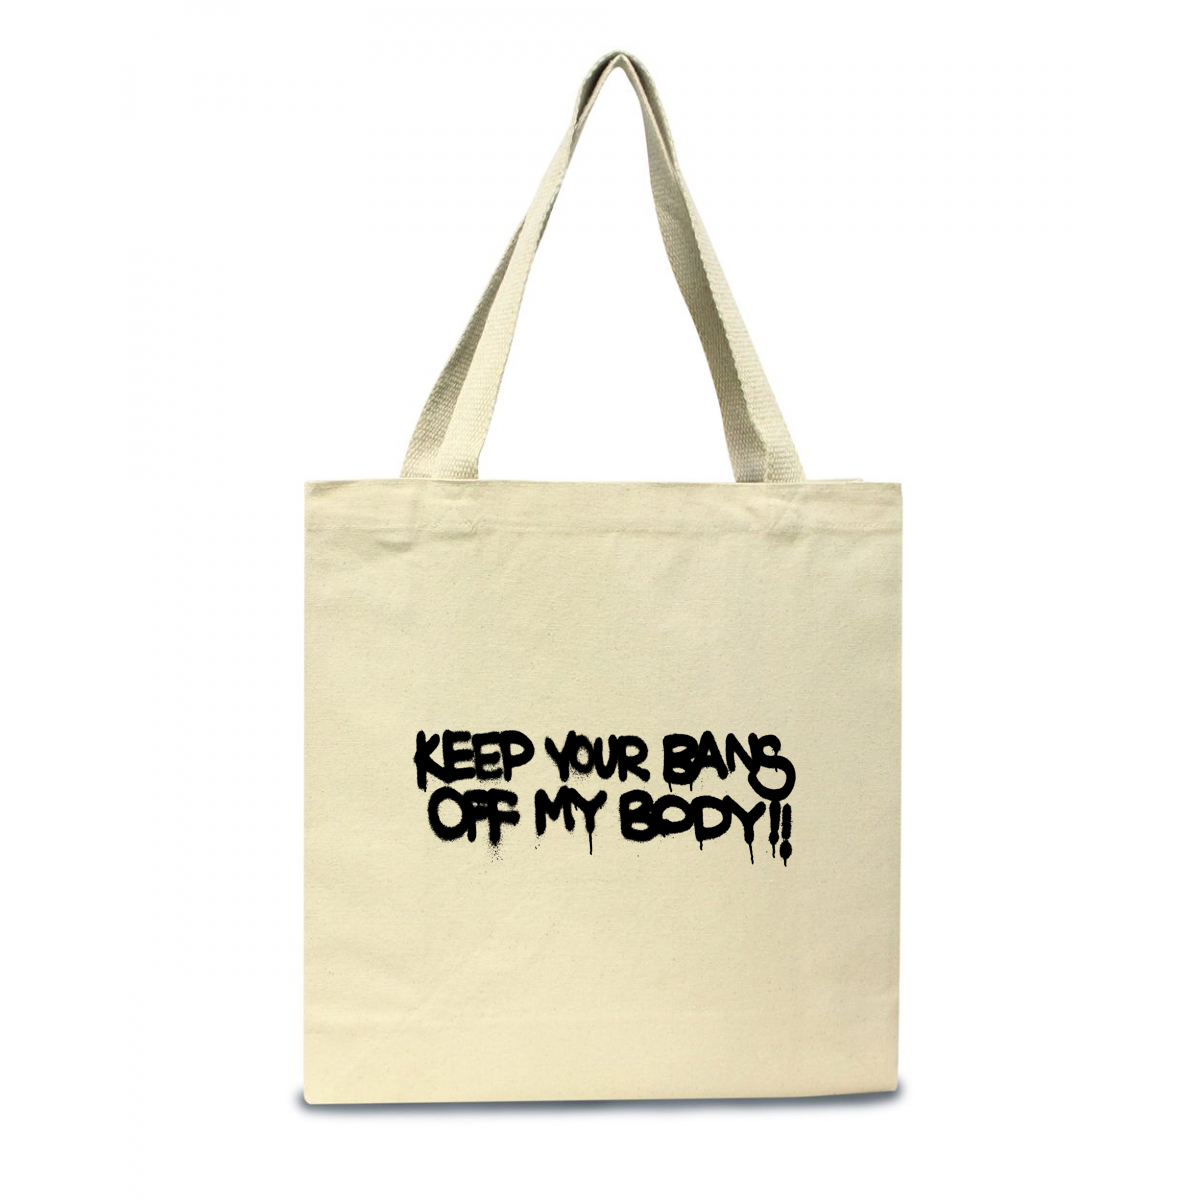 Keep Your Bans Tote